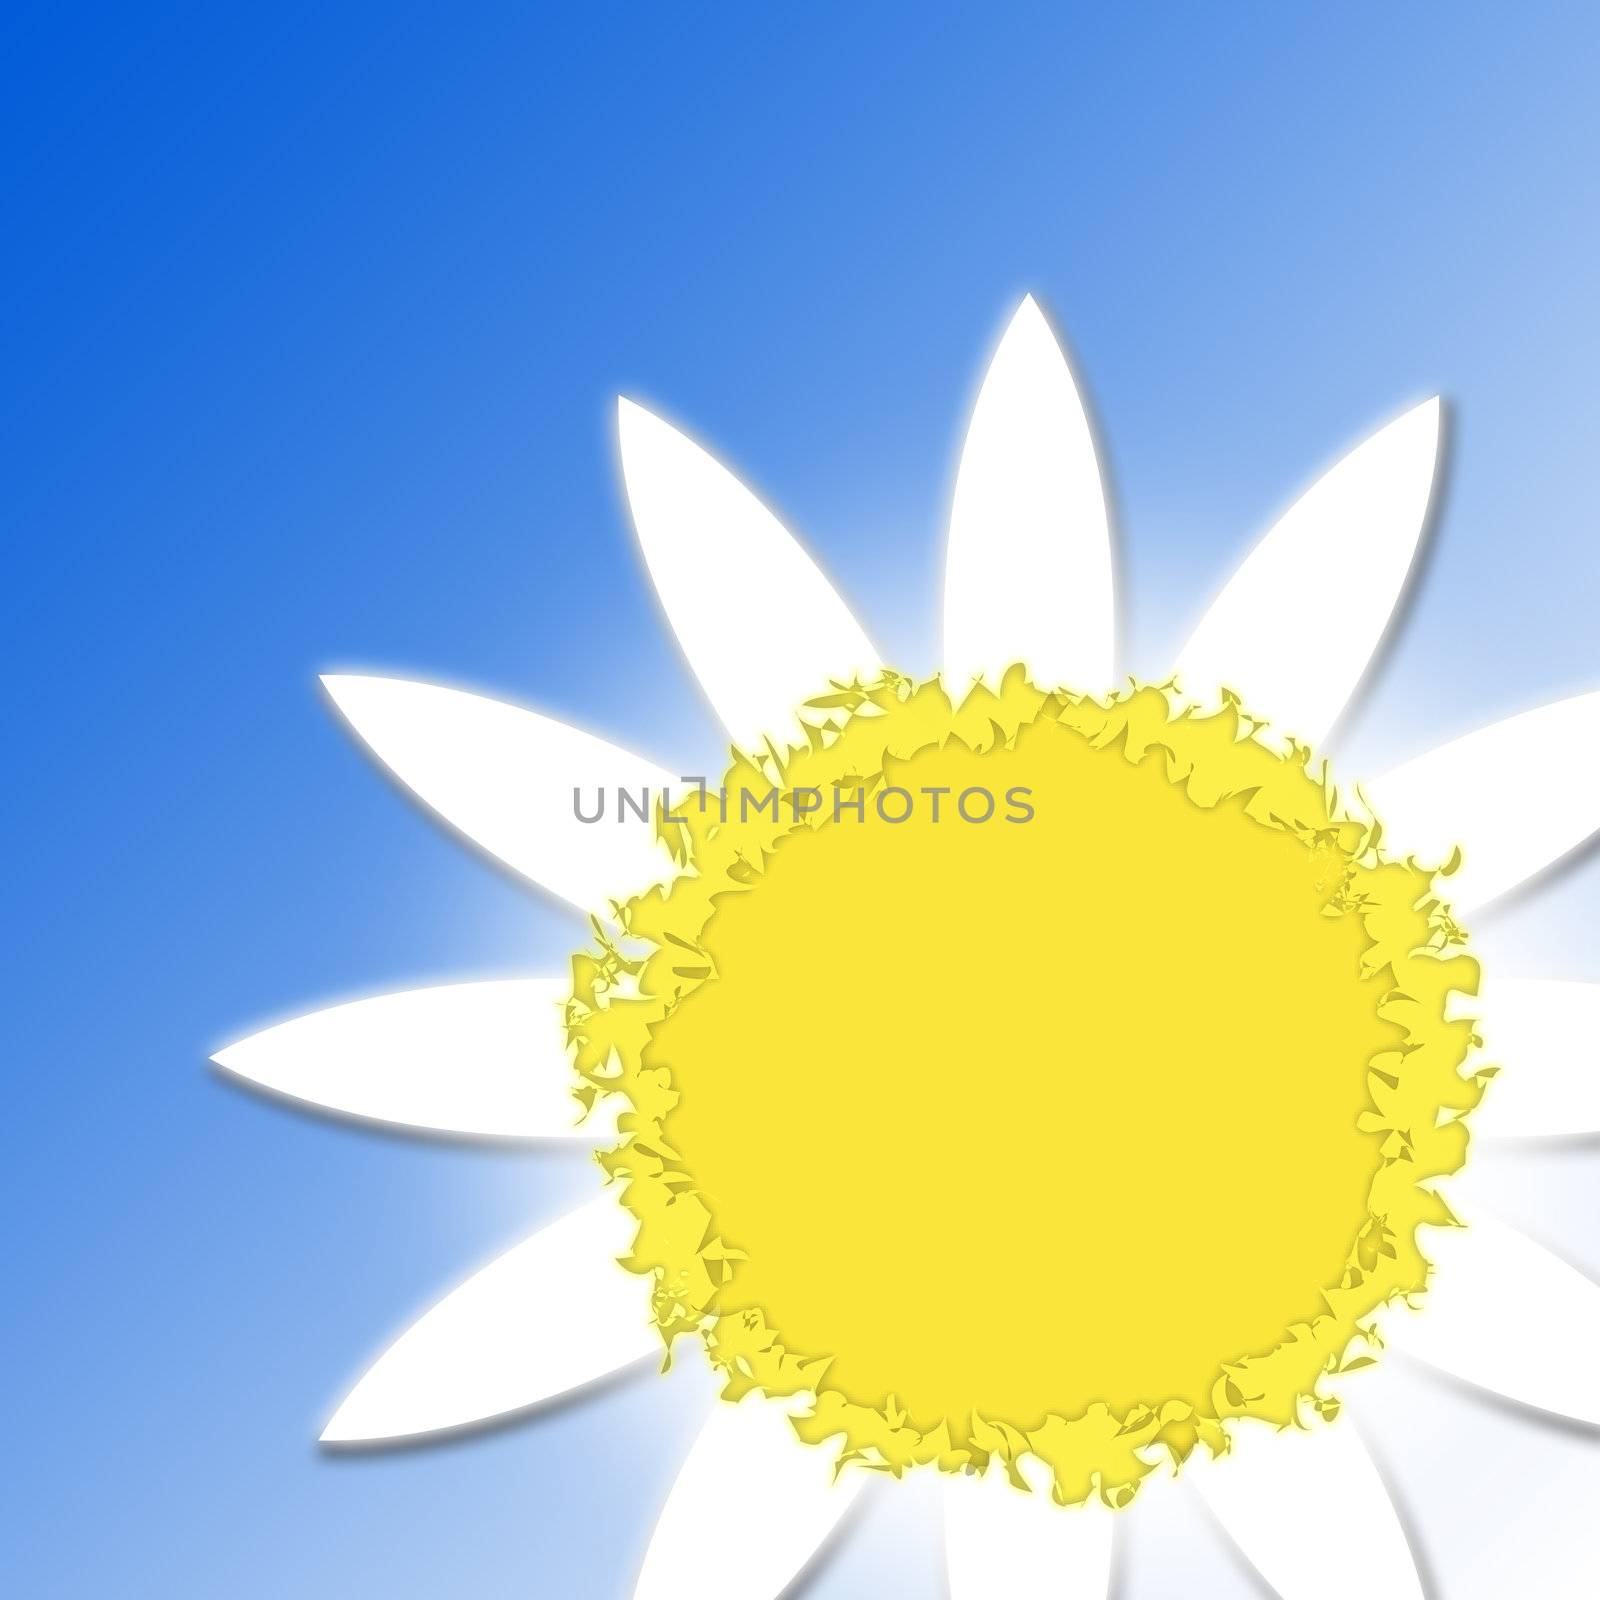 Graphic representation of a flower similar to the sun on a blue background
